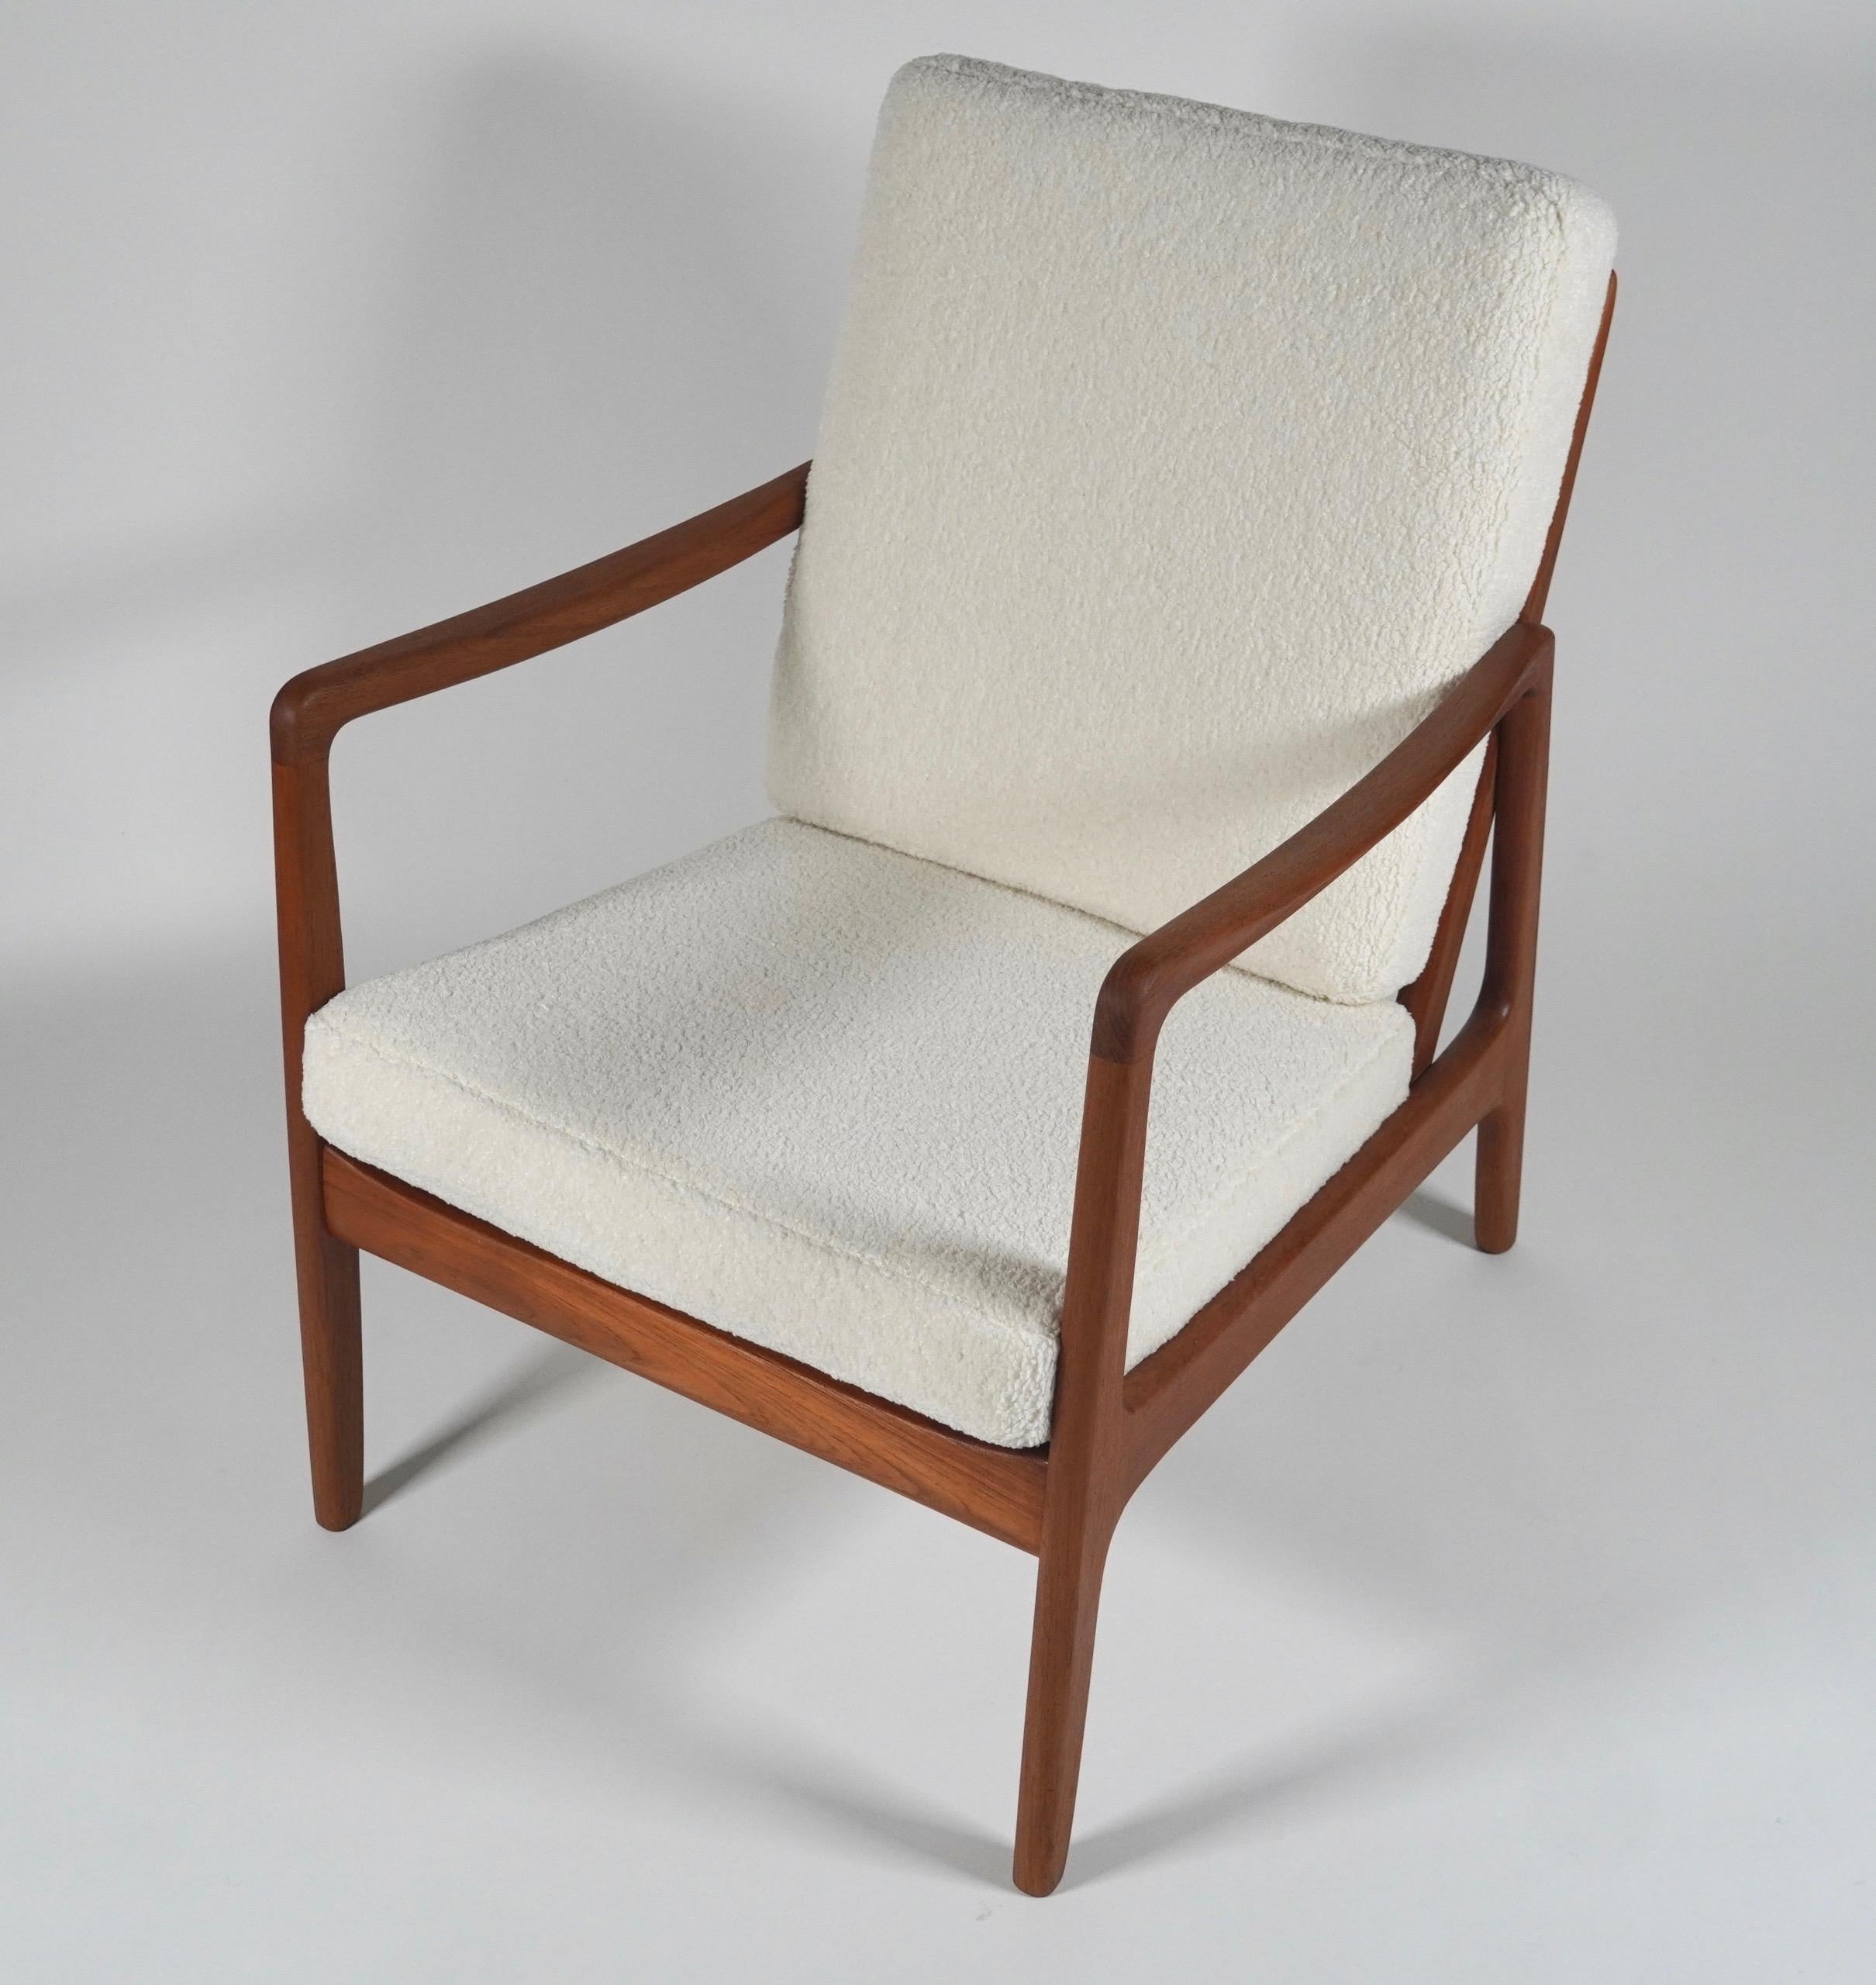 Armchair Model 166 designed by Danish architect Ole Wanscher crafted by France & Deverkosen of Denmark and imported by John Stuart Inc., circa 1950s N.Y. John Stuart was a collector of important modern art who had a business importing high end